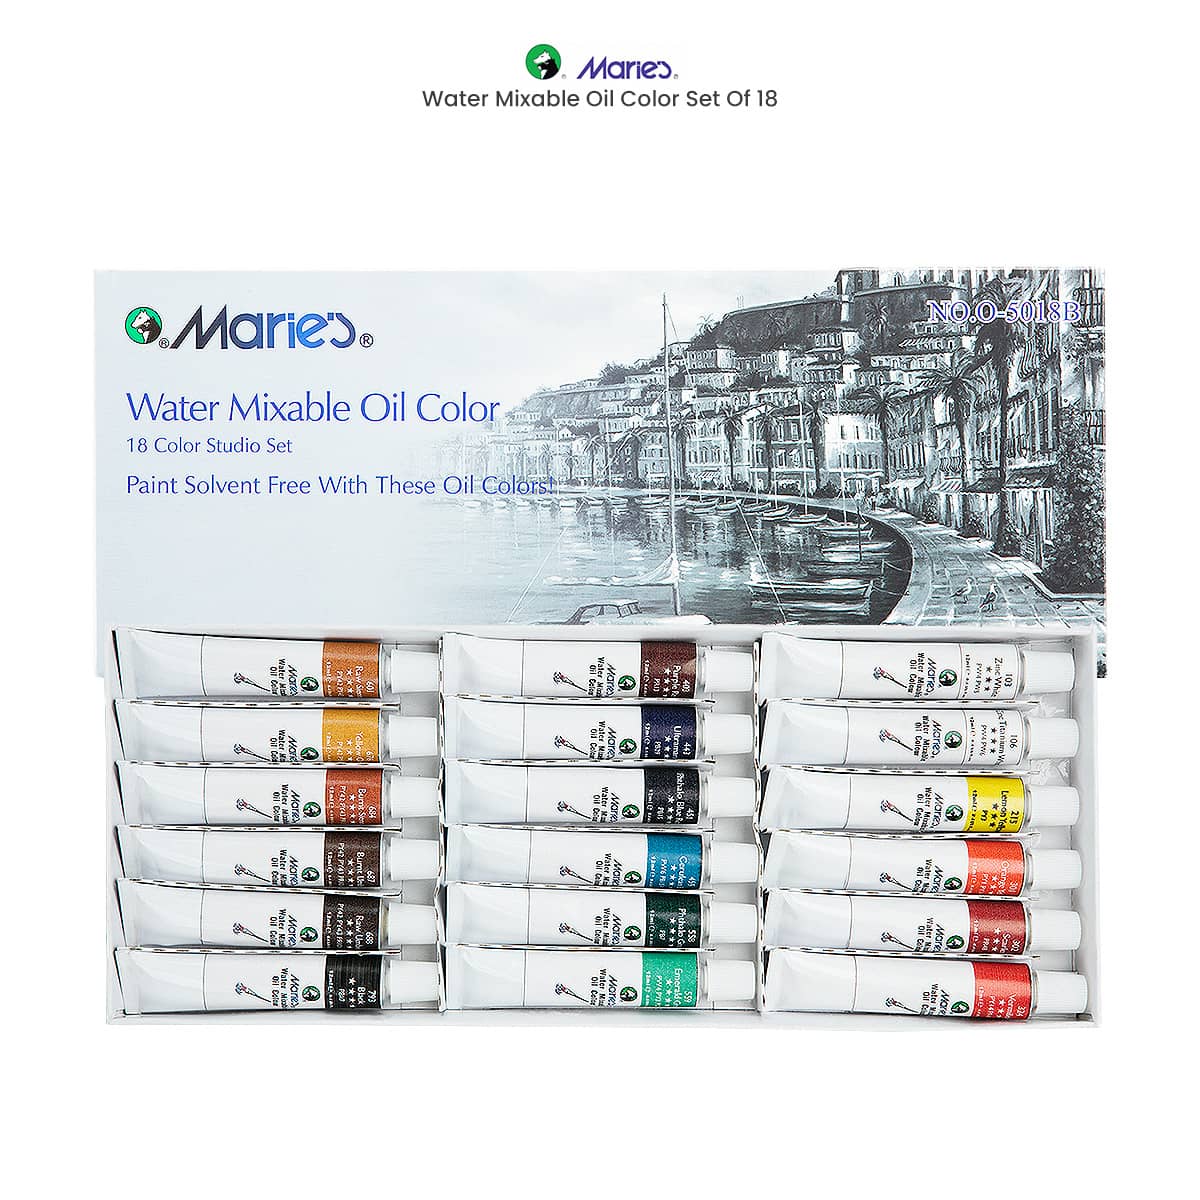 Marie's Water Mixable Oil Color Set Of 18